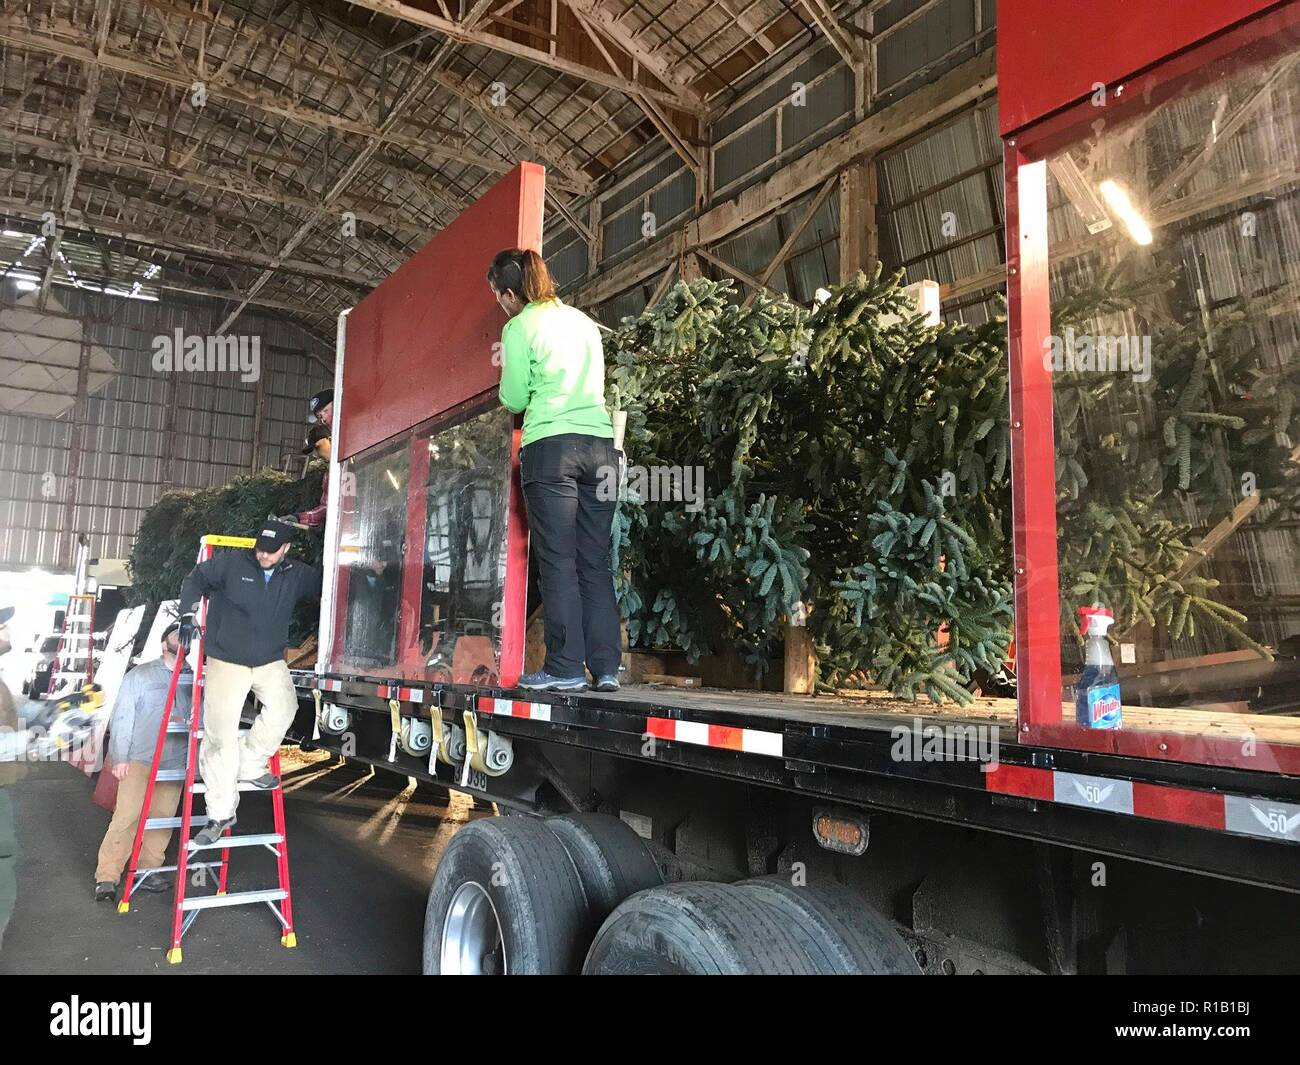 Workers begin packing the freshly cut noble fir selected as the 2018 National Christmas tree as it is enclosed in a crate on a flatbed truck for the long journey to Washington, DC November 4, 2018 in Sweet Home, Oregon. The tree was cut from the Willamette National Forest, measures 72 feet long, and weighs more than seven tons and will decorate the West Lawn of the U.S. Capitol after traveling 3,000-miles across the country. Stock Photo